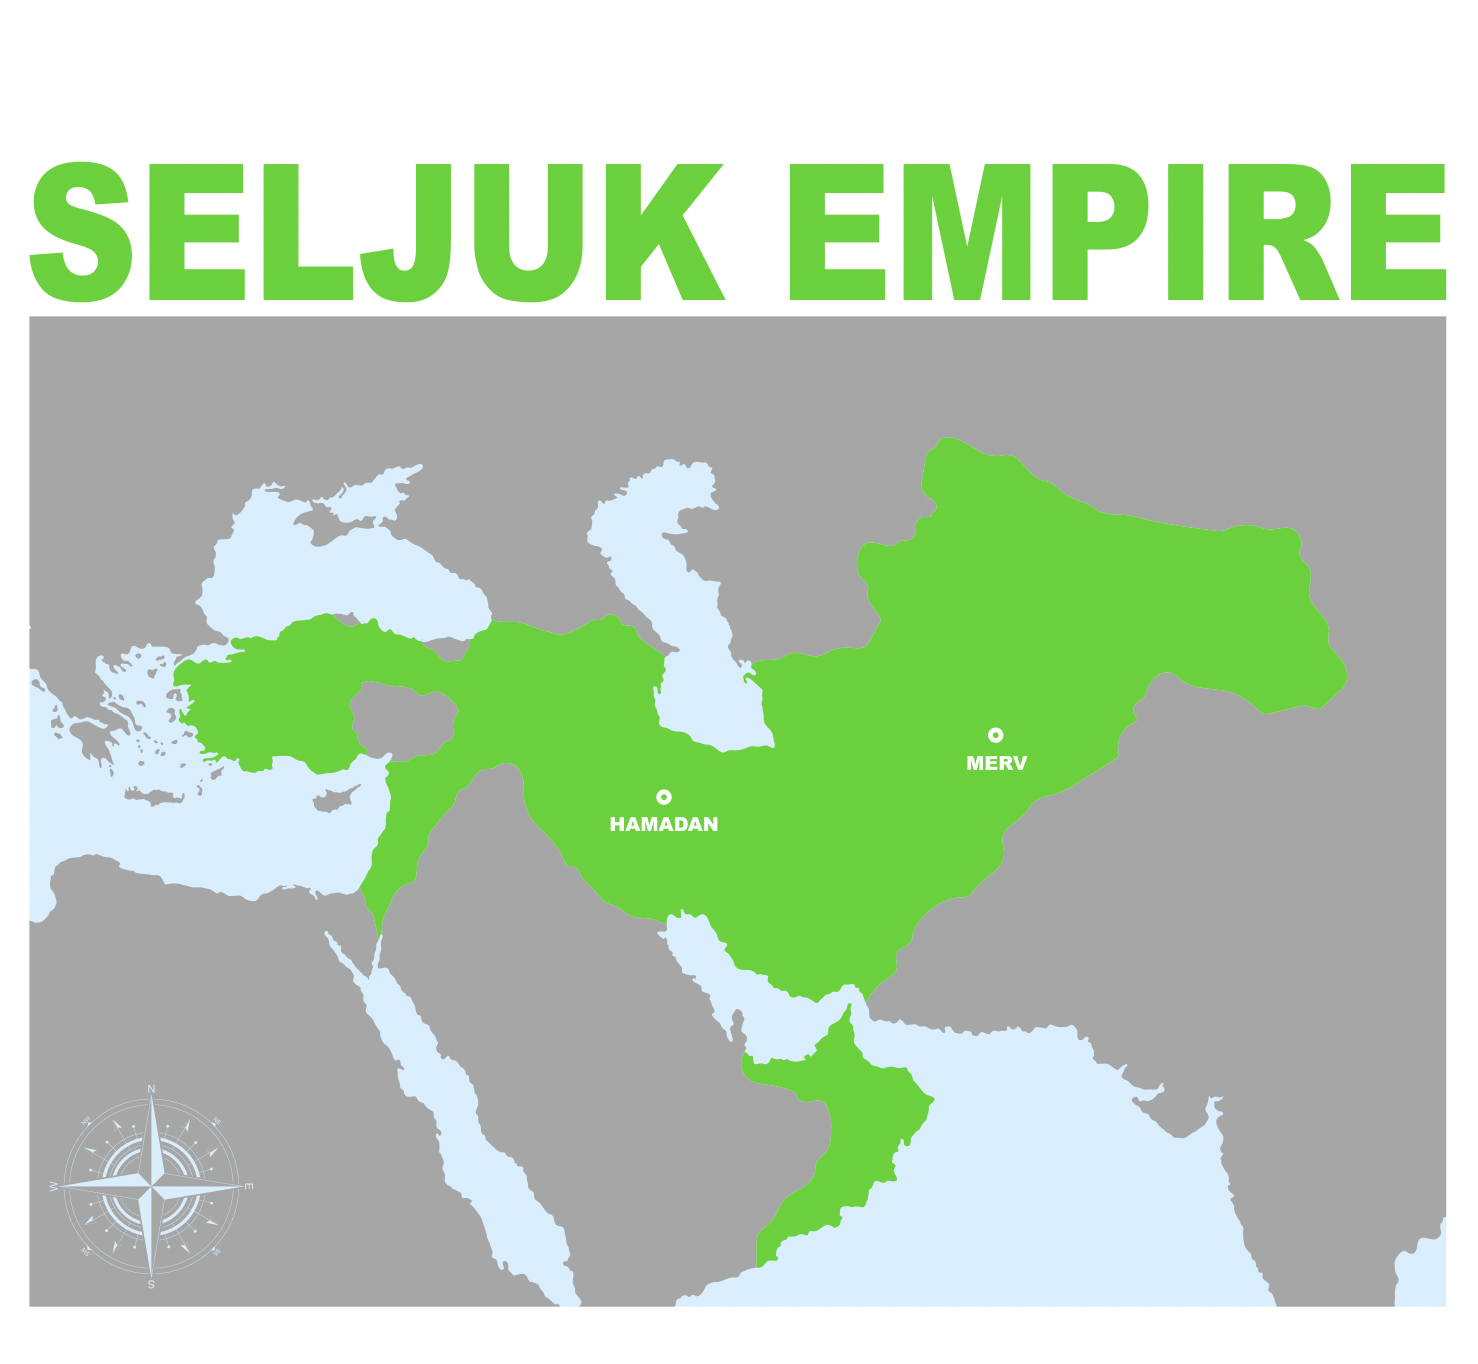 The green represents the rule of the Seljuk Empire at its height © Sidhe / Shutterstock